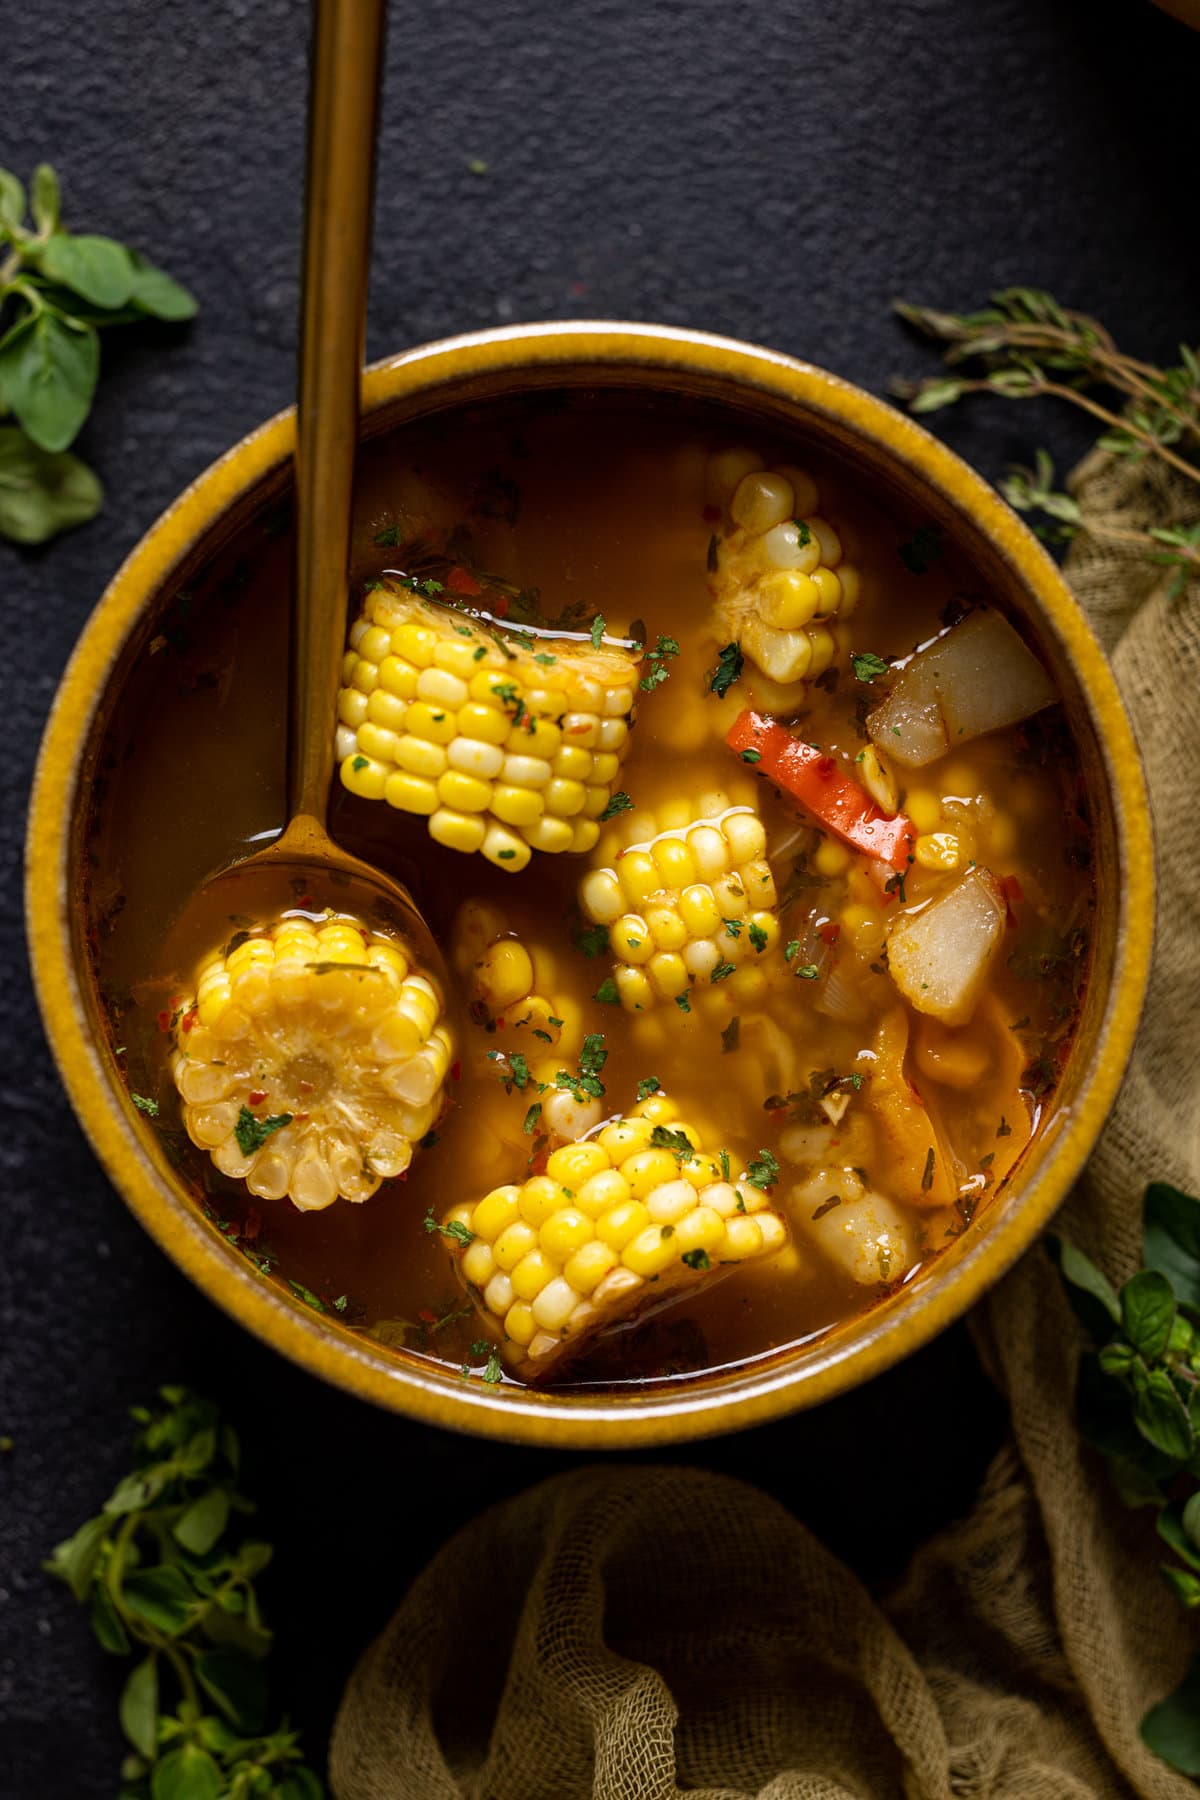 Corn soup in a yellow bowl with a spoon.